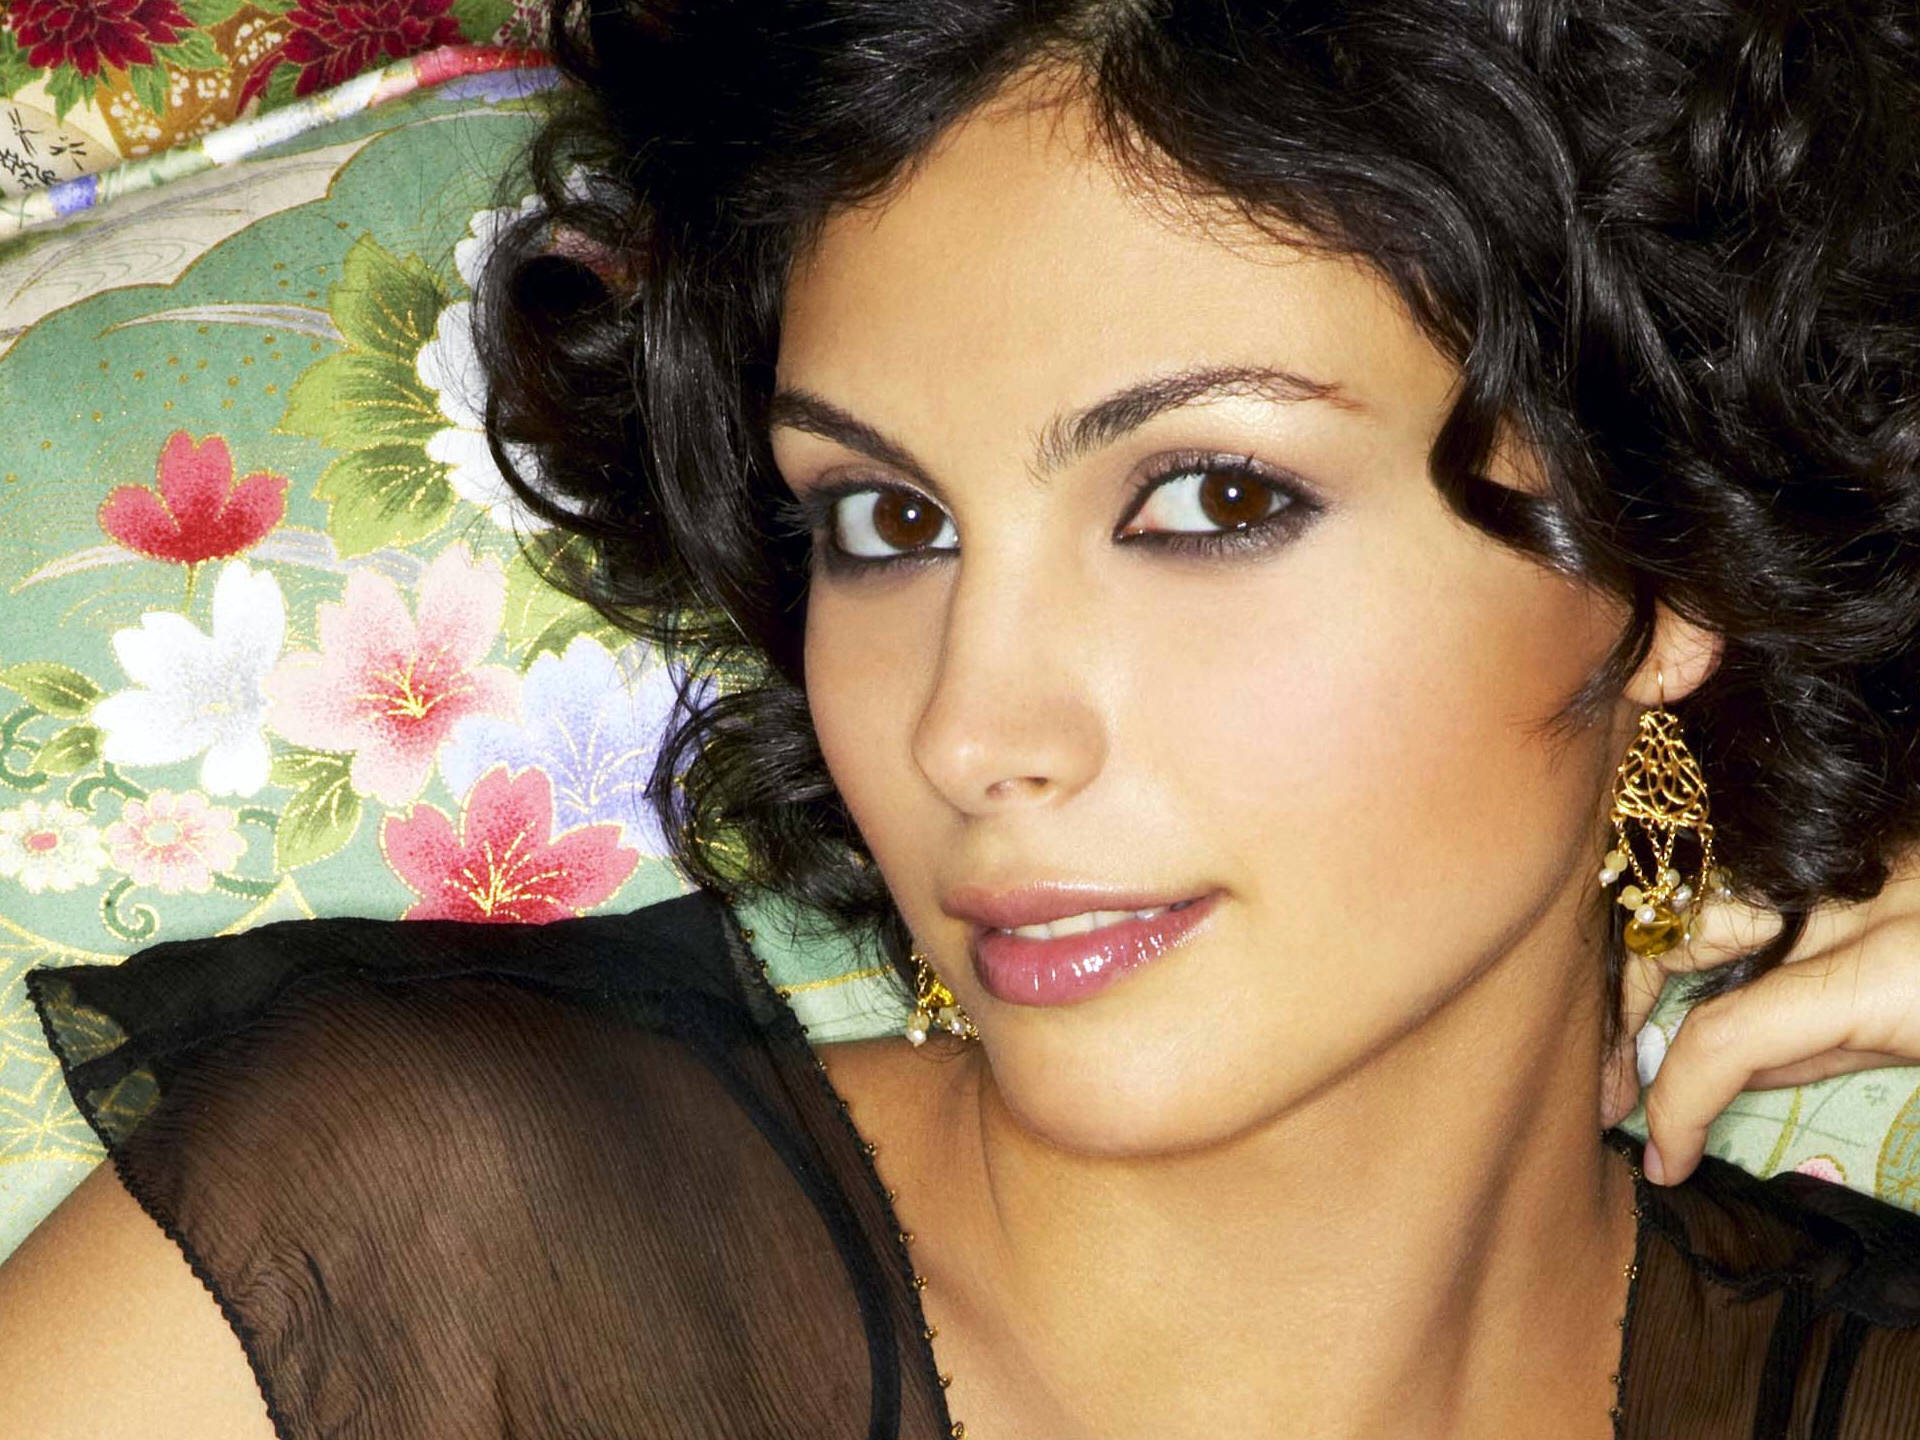 Download full size Morena Baccarin wallpaper / Celebrities Female / 1920x1440